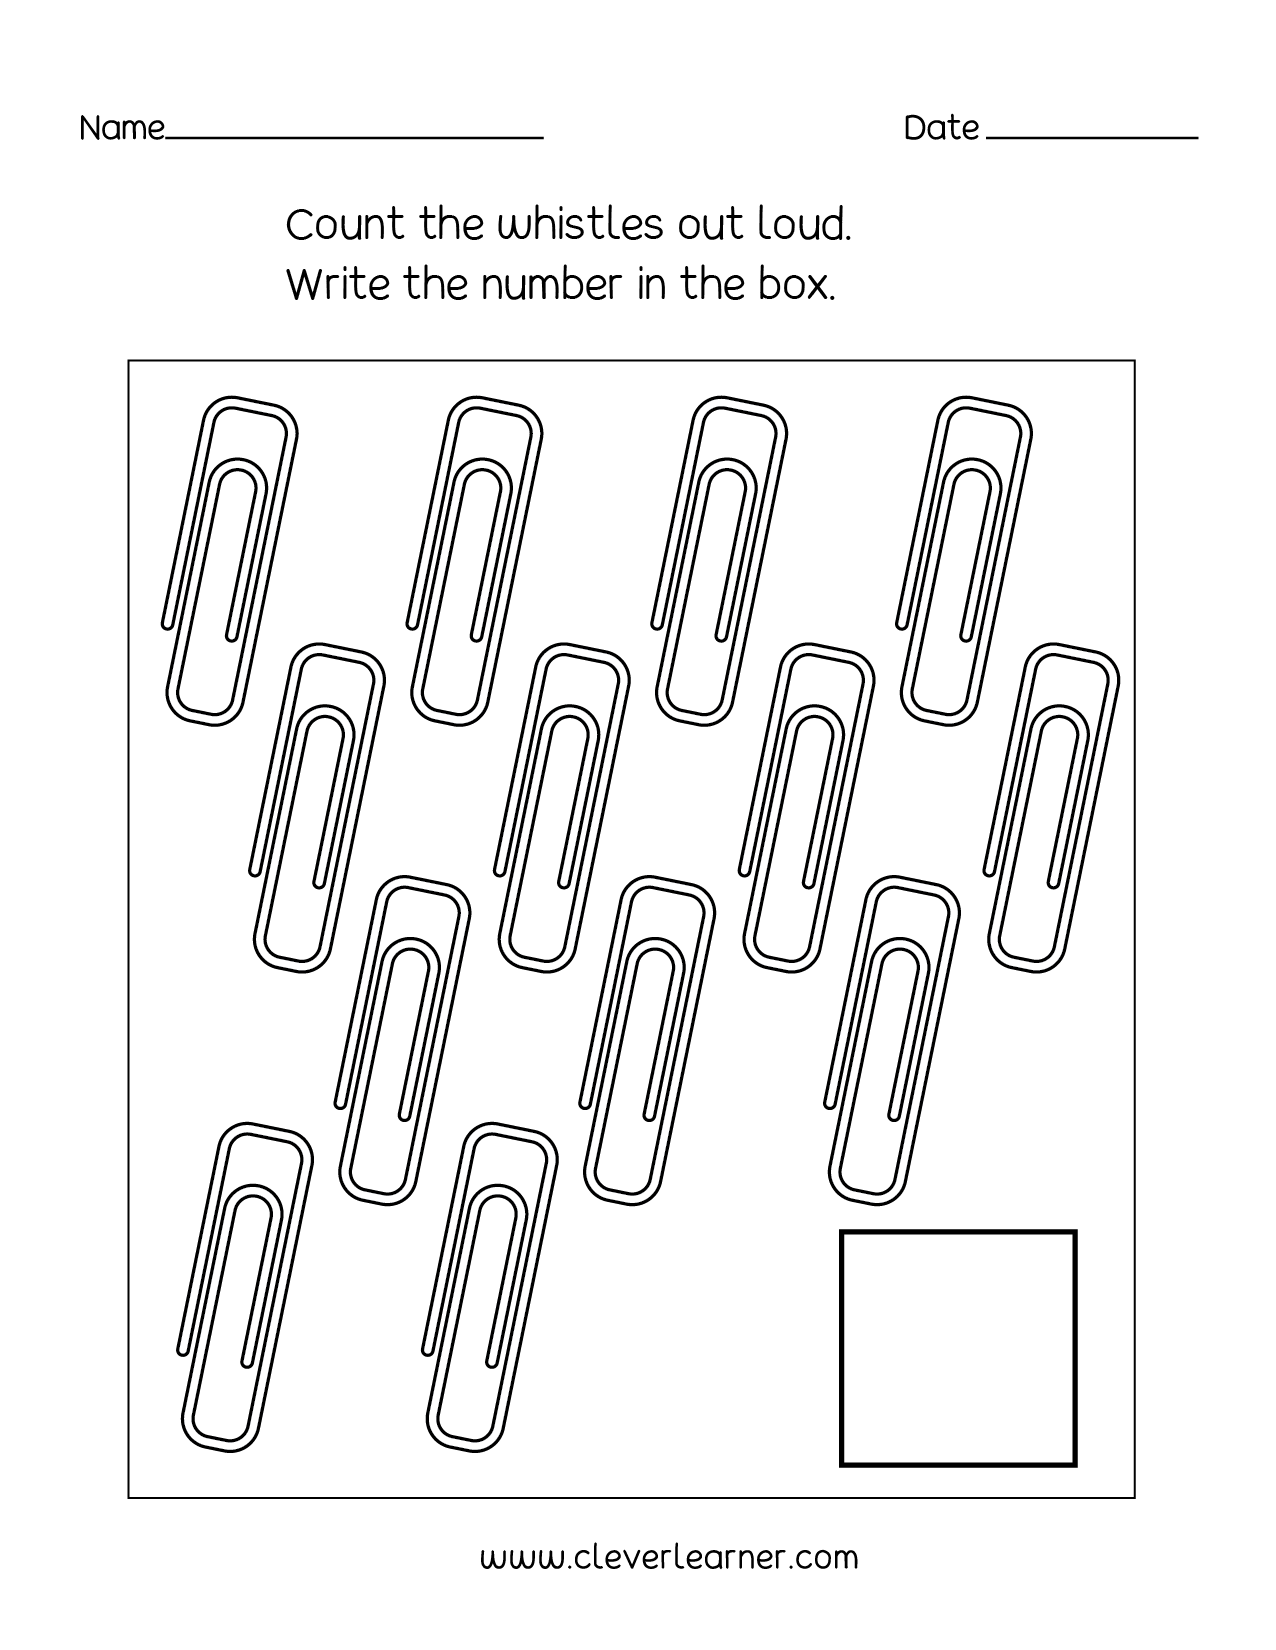 number-13-writing-counting-and-identification-printable-worksheets-for-children